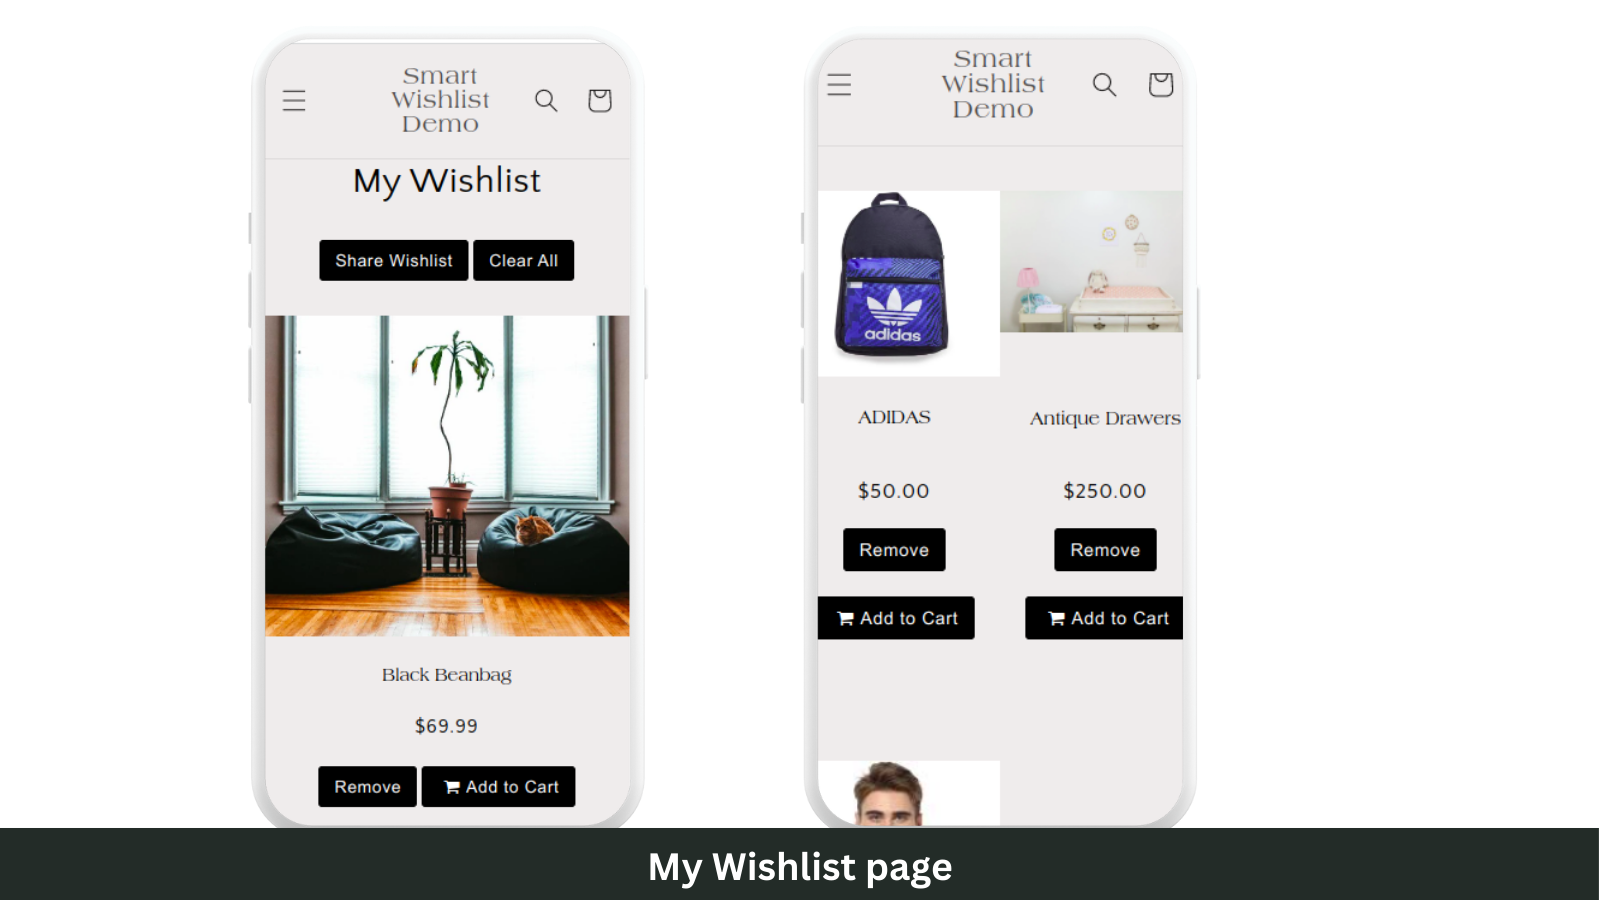 My Wishlist page generated by Smart Wishlist on Mobile Devices